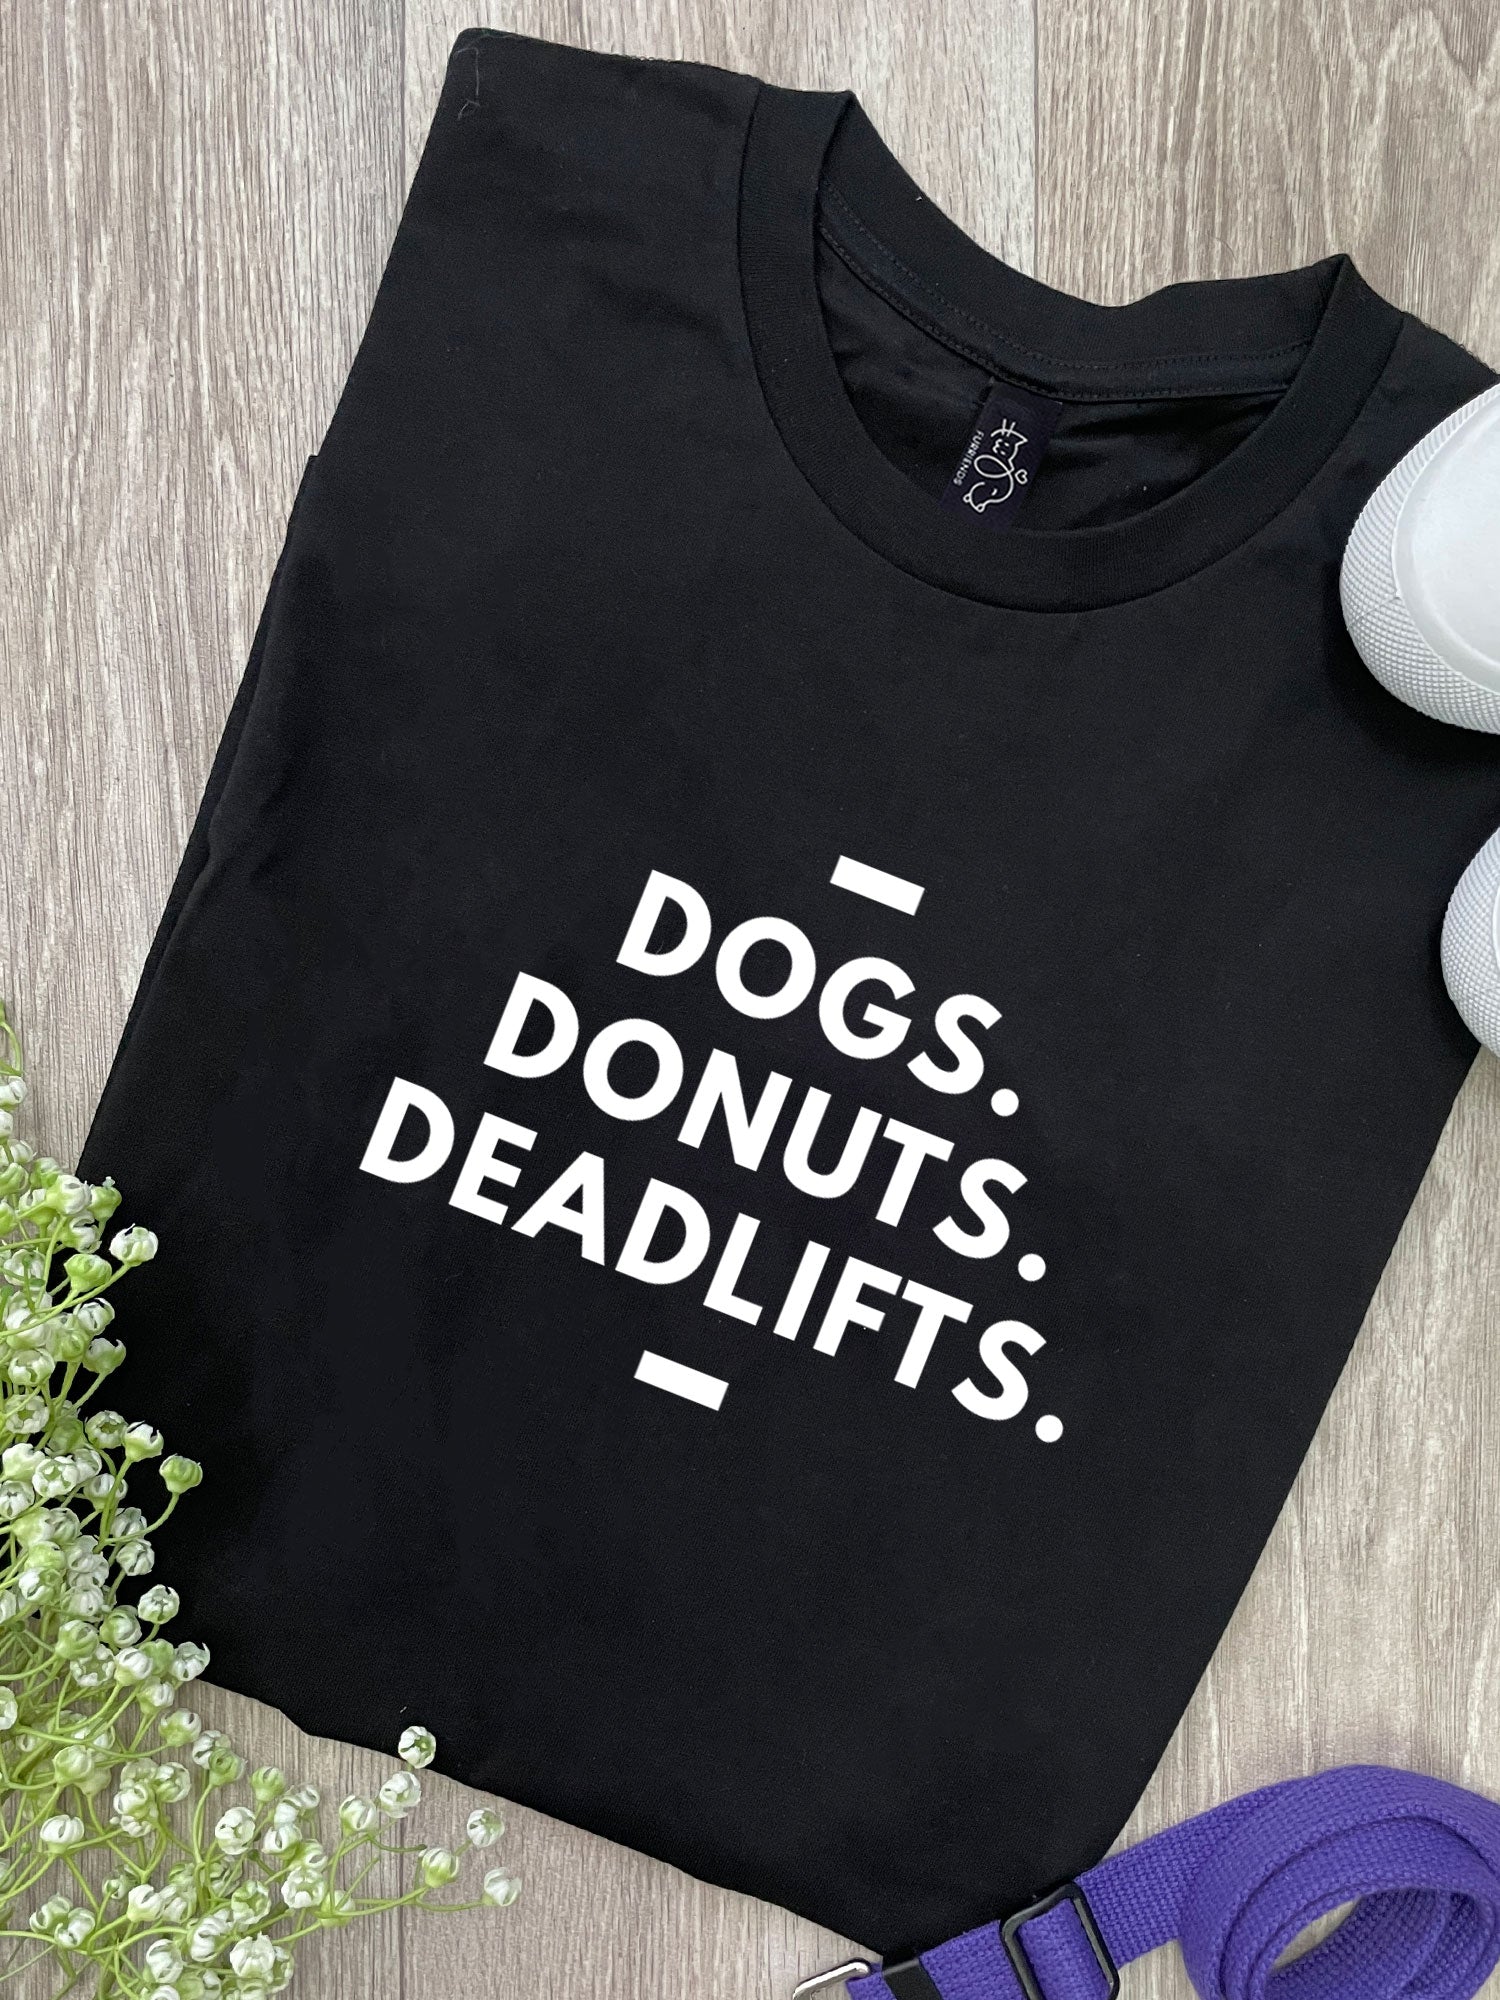 Dogs Donuts Deadlifts